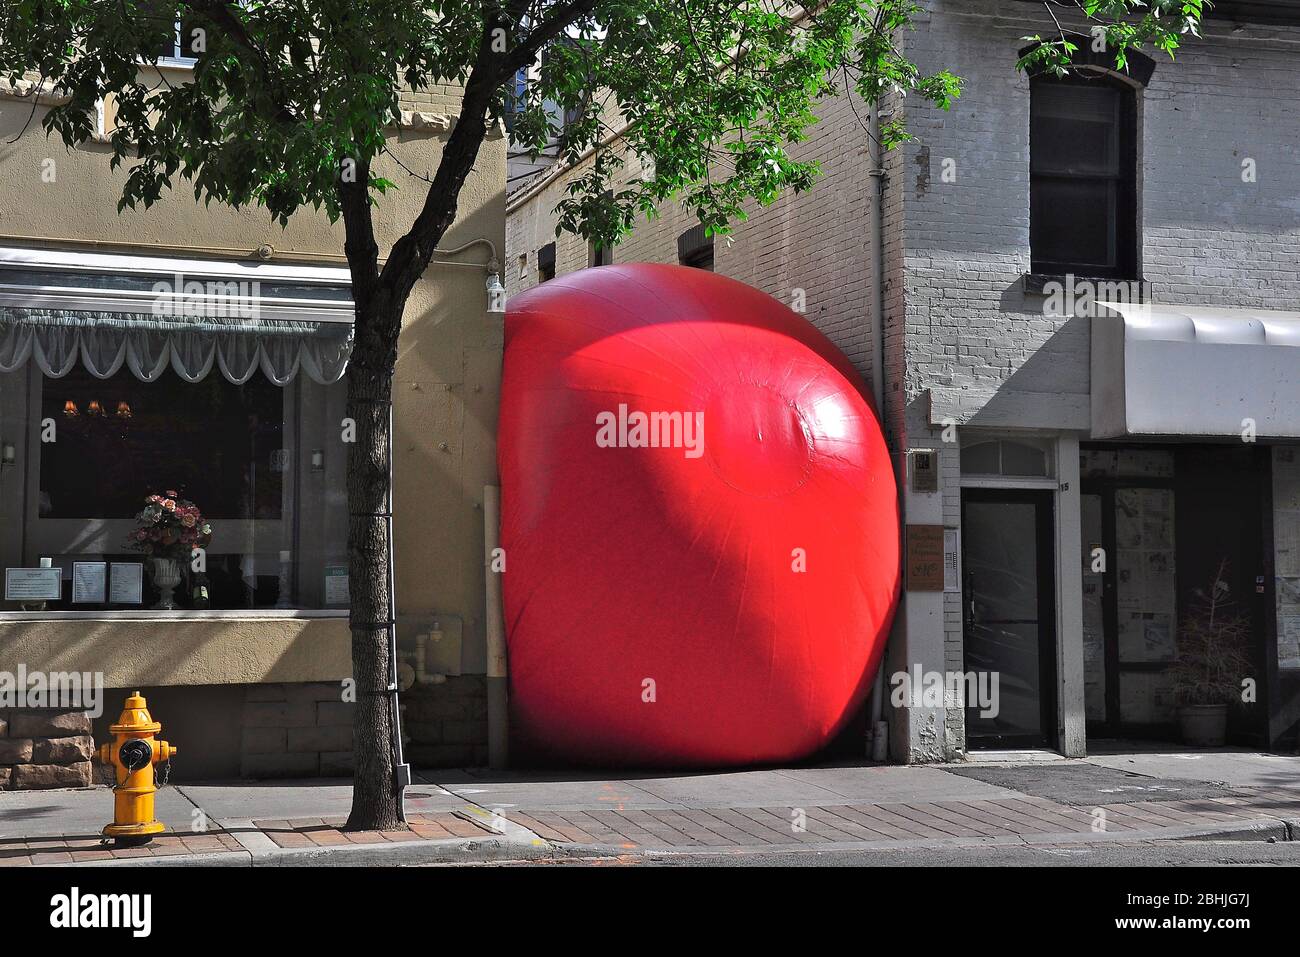 Toronto, Ontario, Canada - 06/12/2009:  A huge red ball is installed as public art exhibitions between buildings in Toronto downtown. Stock Photo